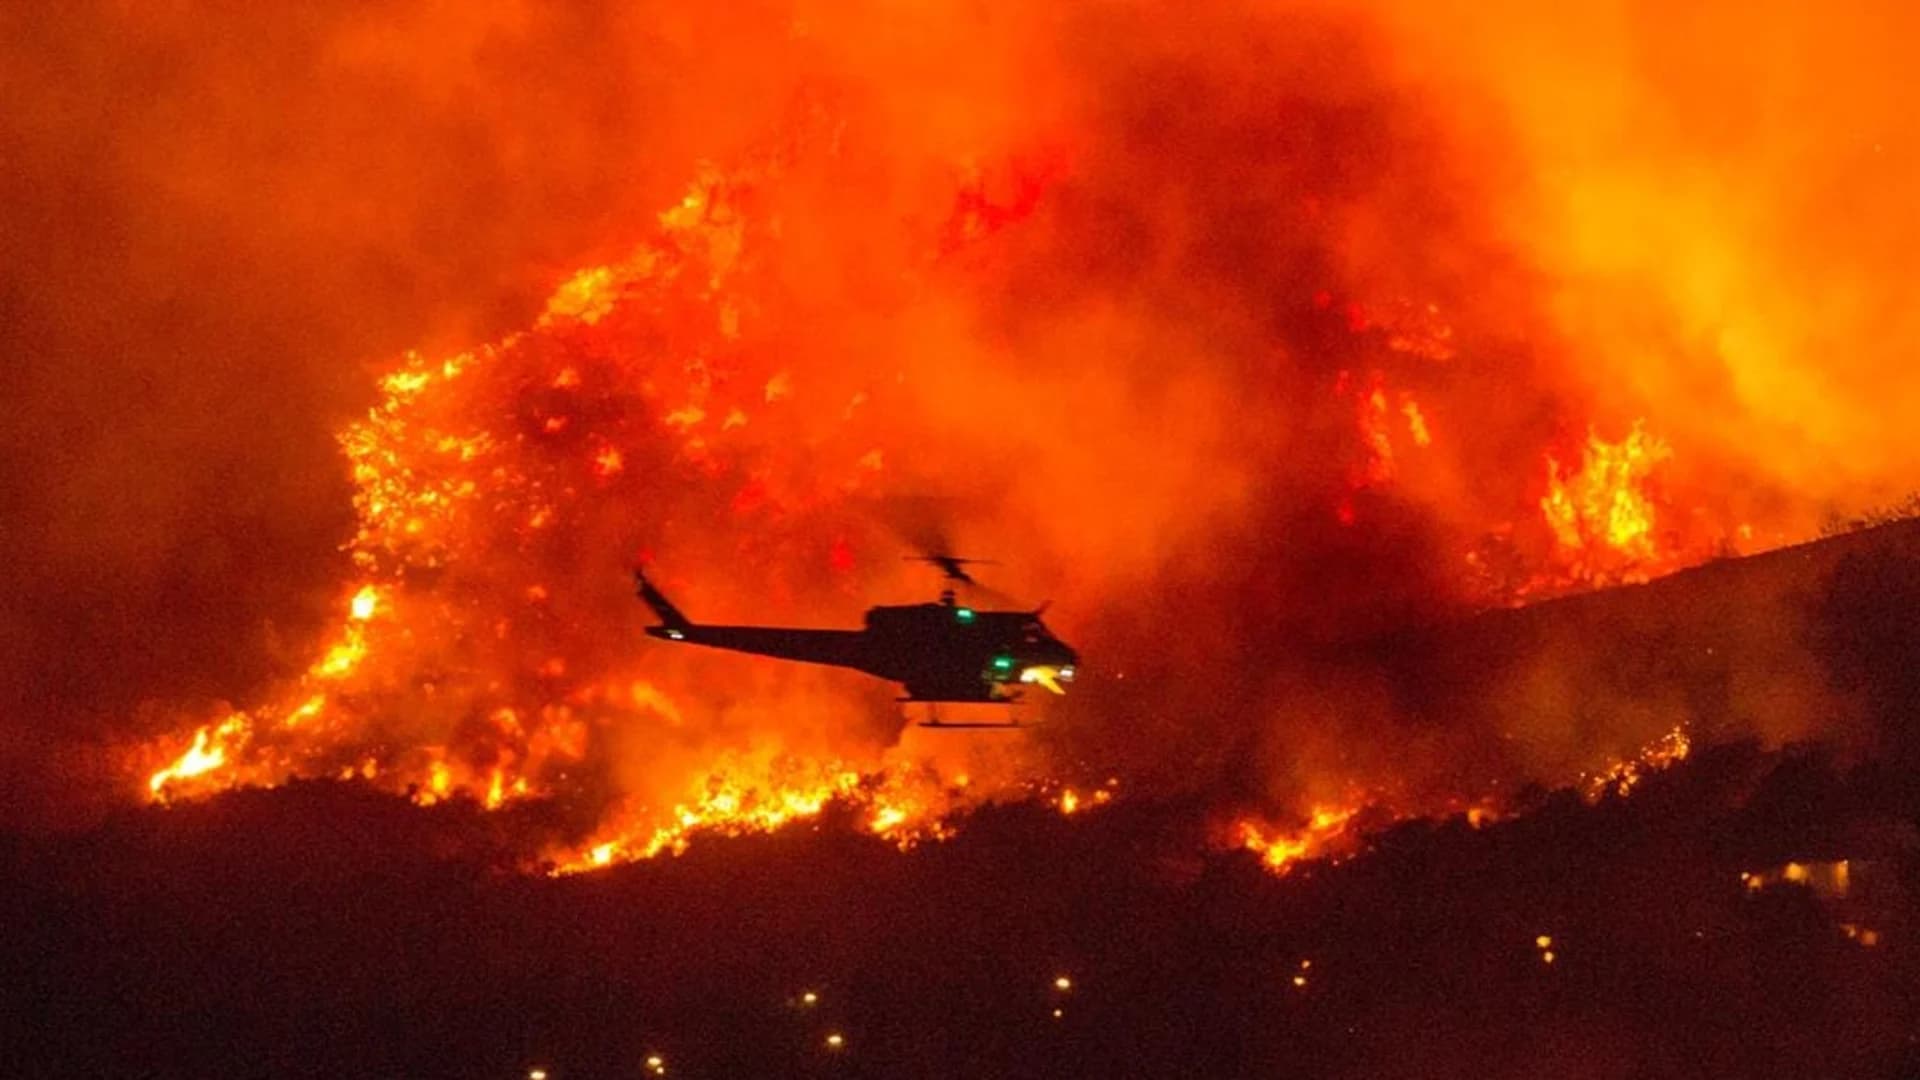 More than 200 airlifted to safety from California wildfire